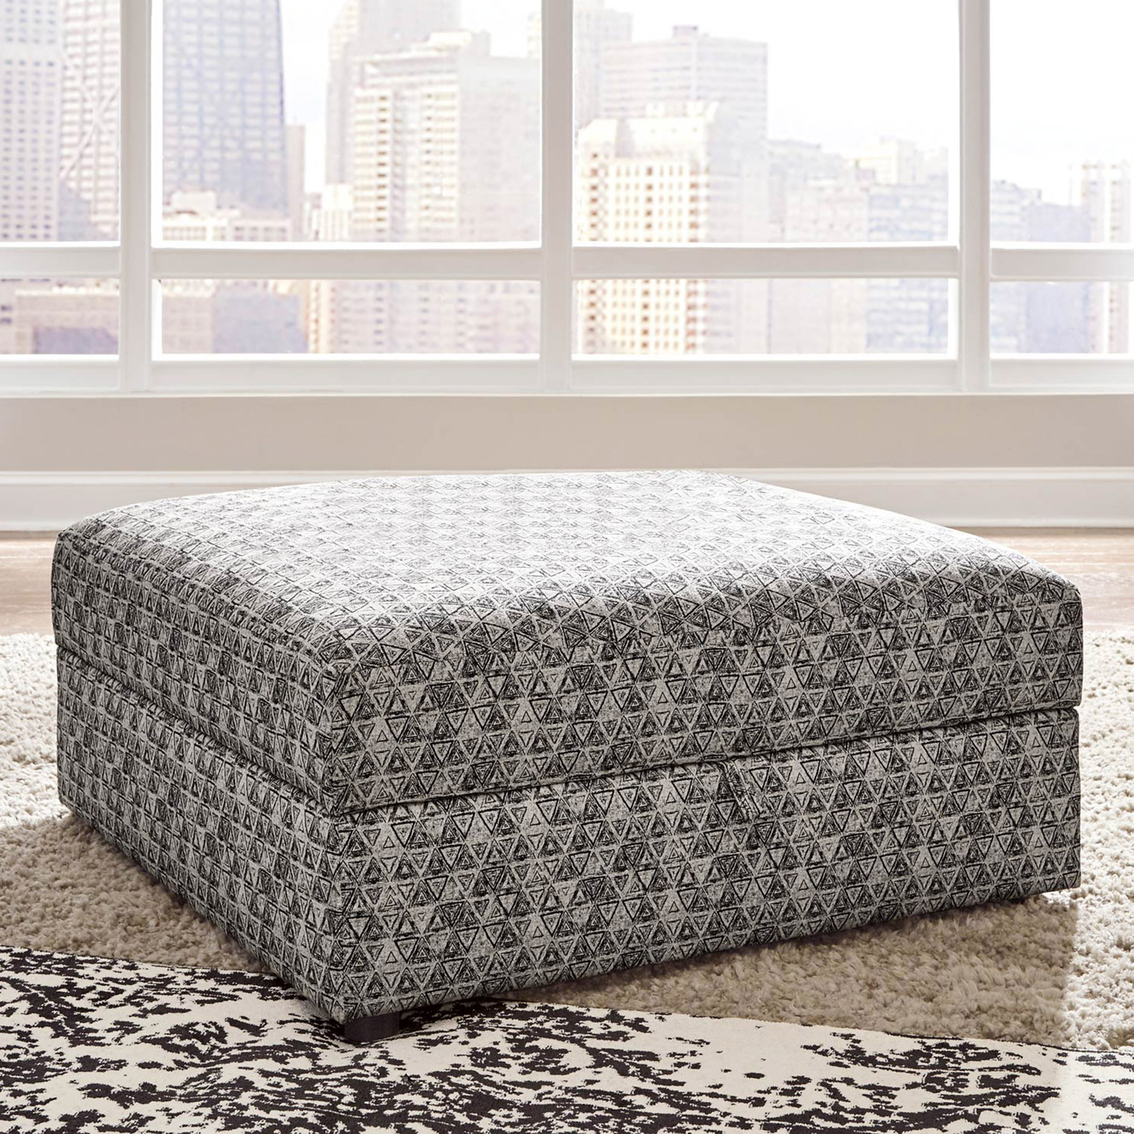 Signature Design by Ashley Kellway Ottoman with Storage - Image 3 of 4